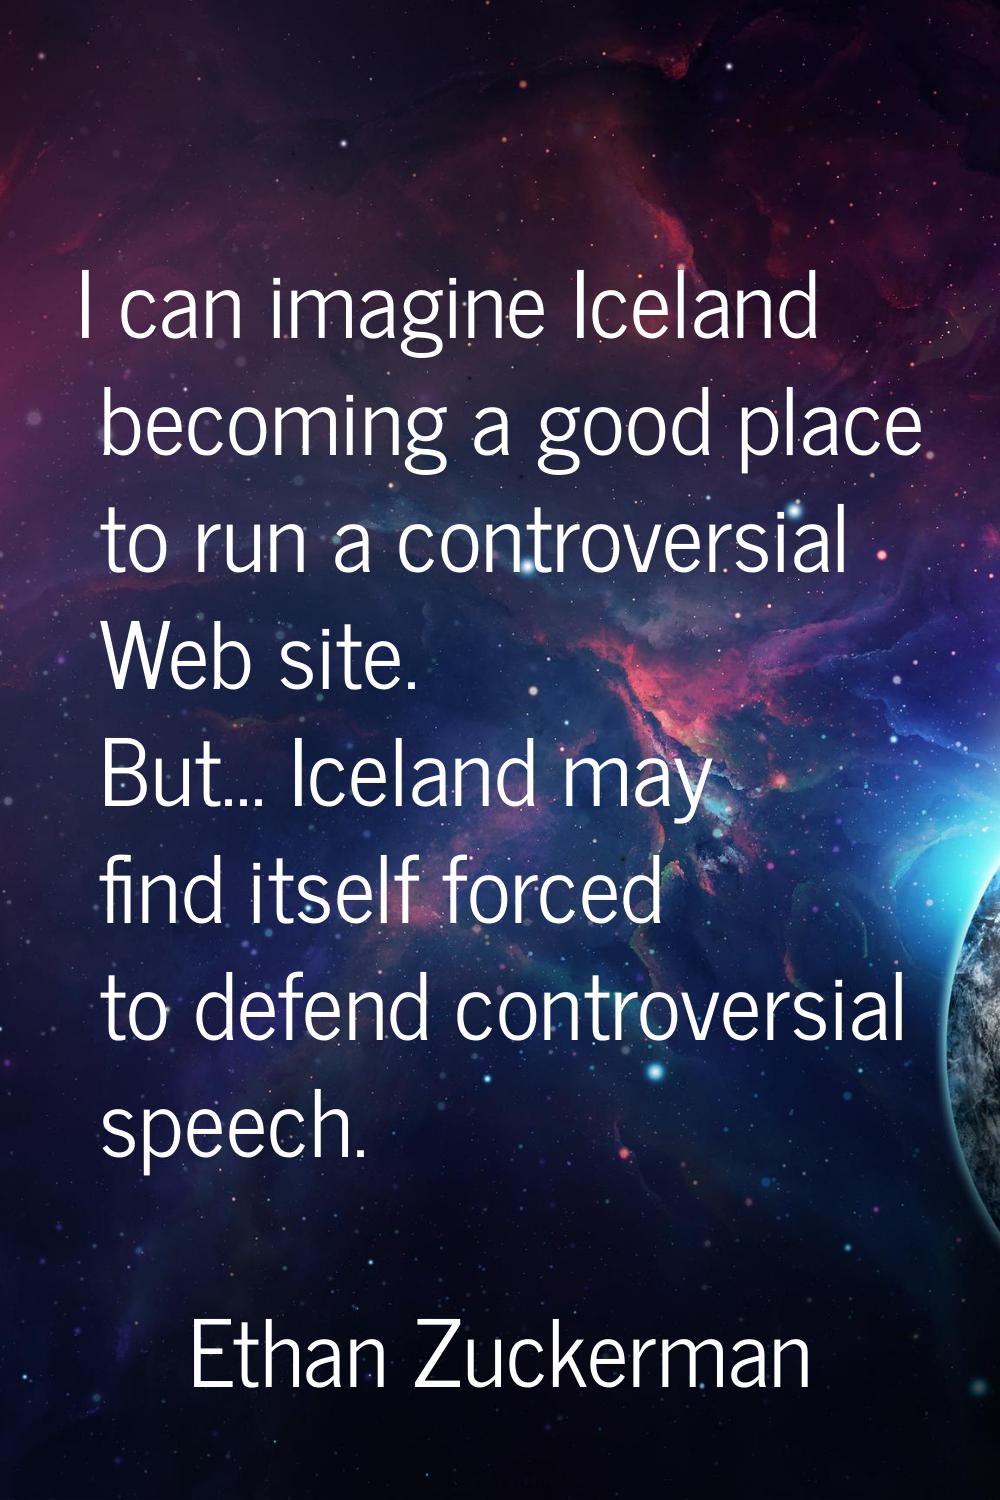 I can imagine Iceland becoming a good place to run a controversial Web site. But... Iceland may fin